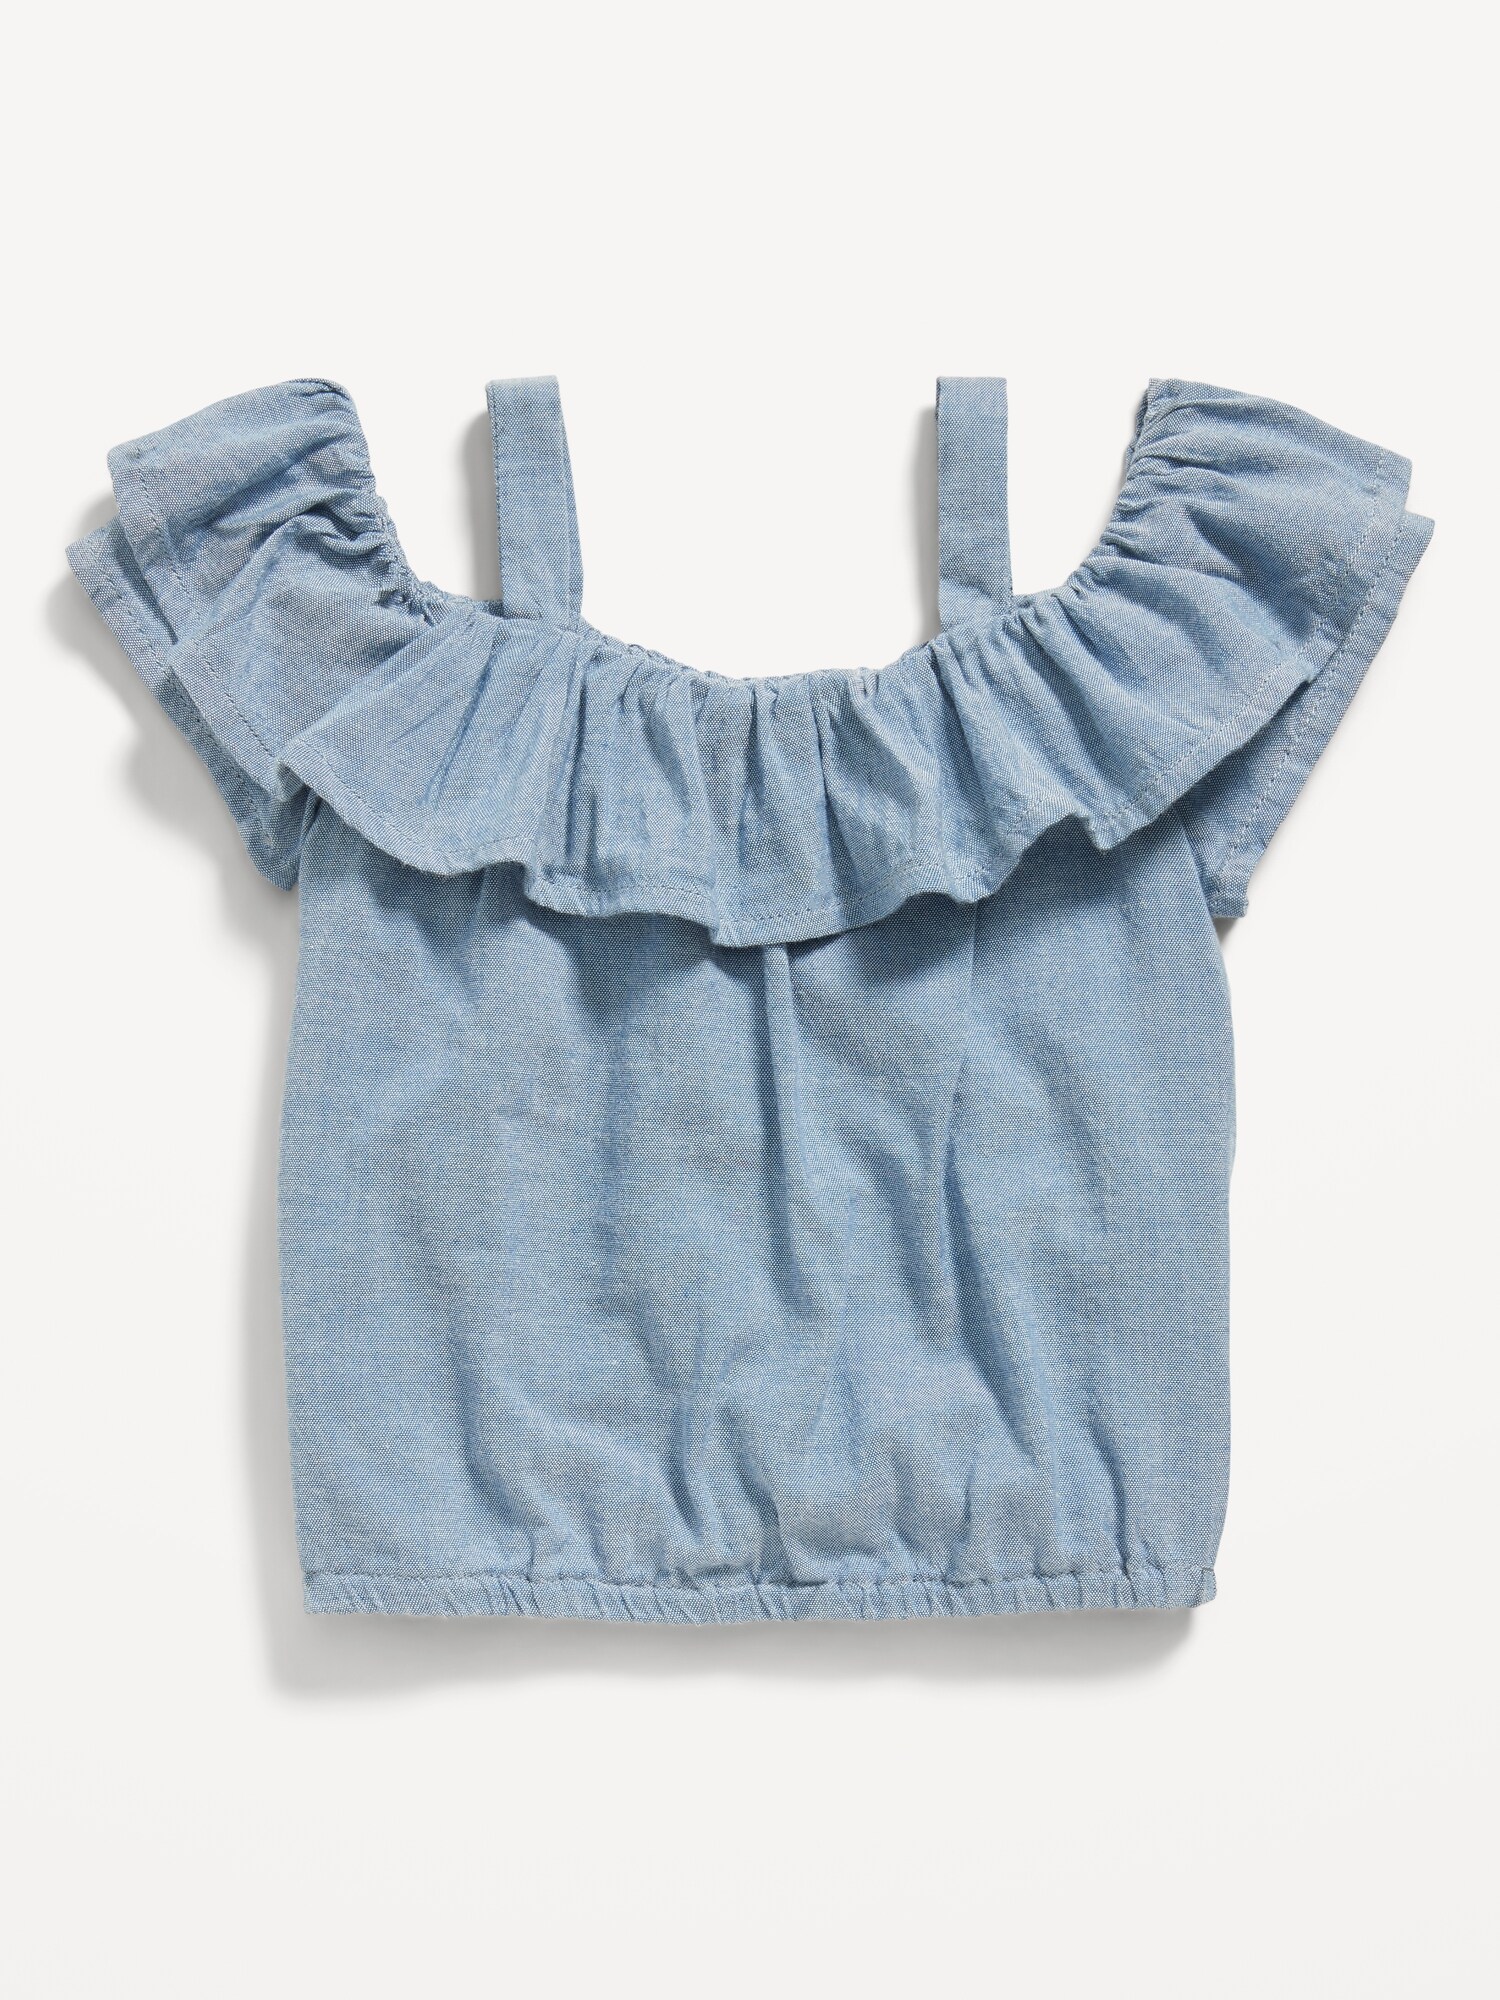 Off-The-Shoulder Ruffled Chambray Top for Baby Hot Deal